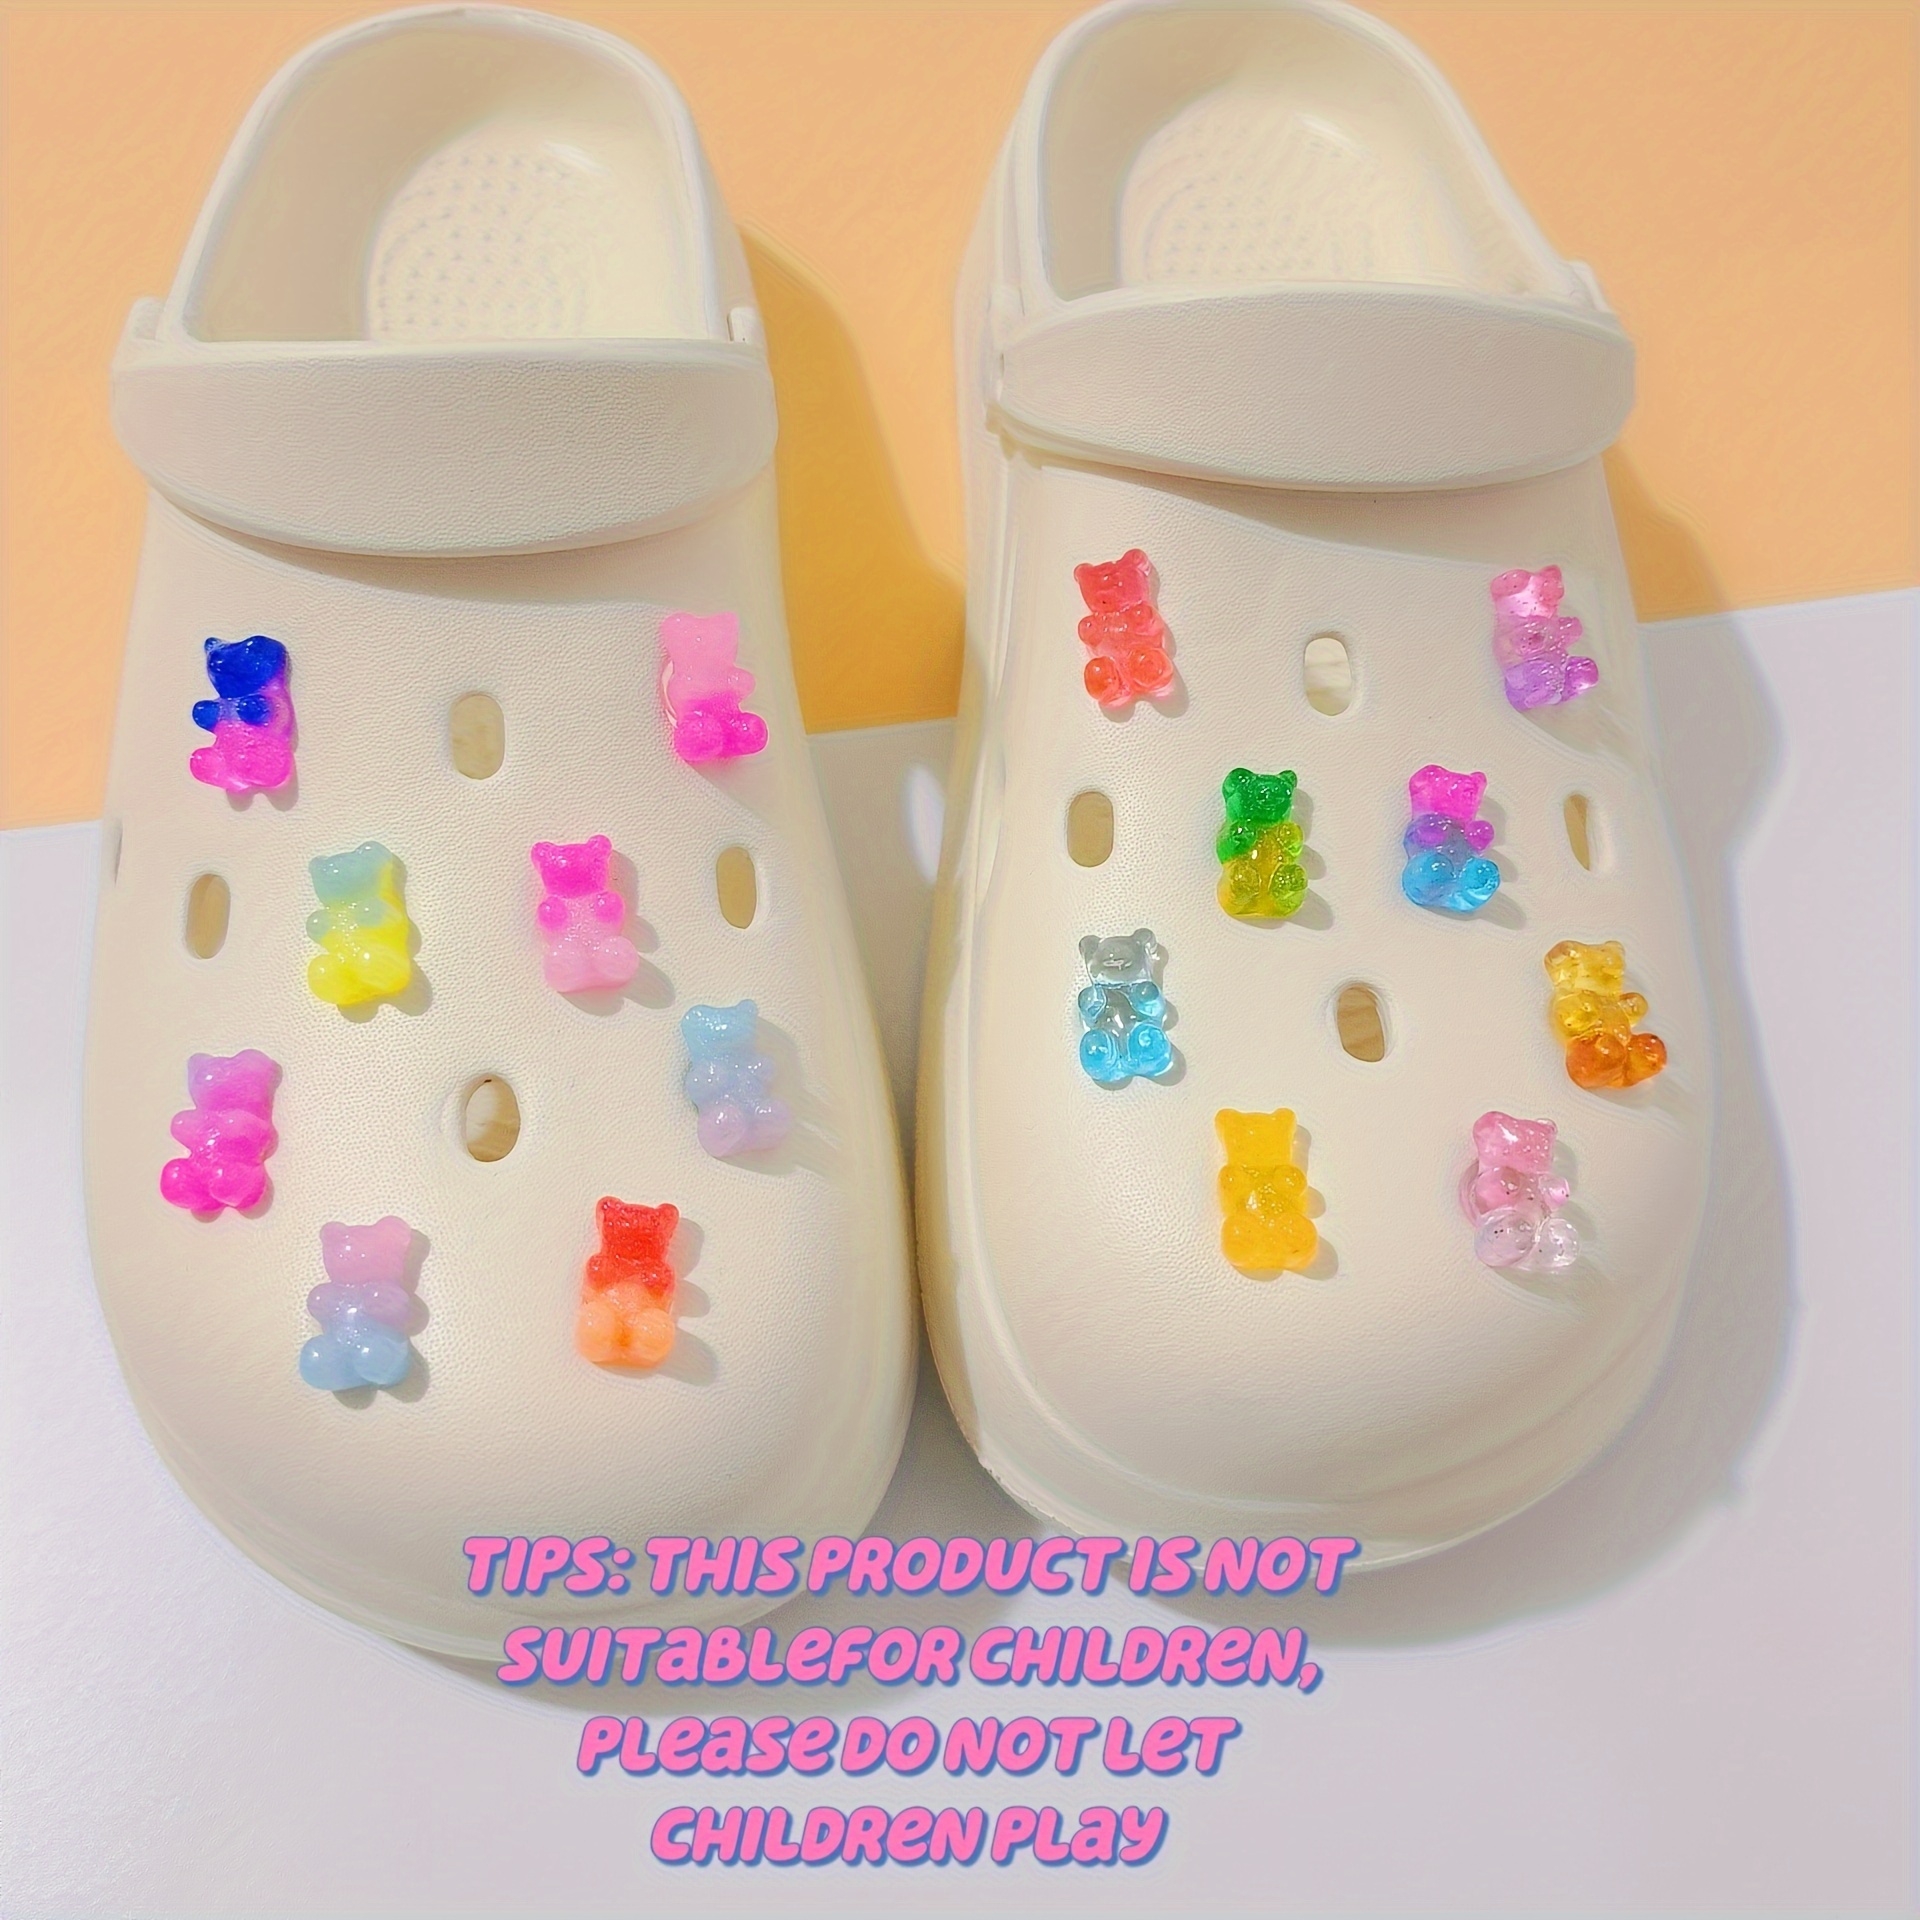 

16pcs Super Cute Jelly Gradient Colorful Bear Birthday Party For Crocs Hole Shoe Accessories Sandals Decorations (no Shoes)